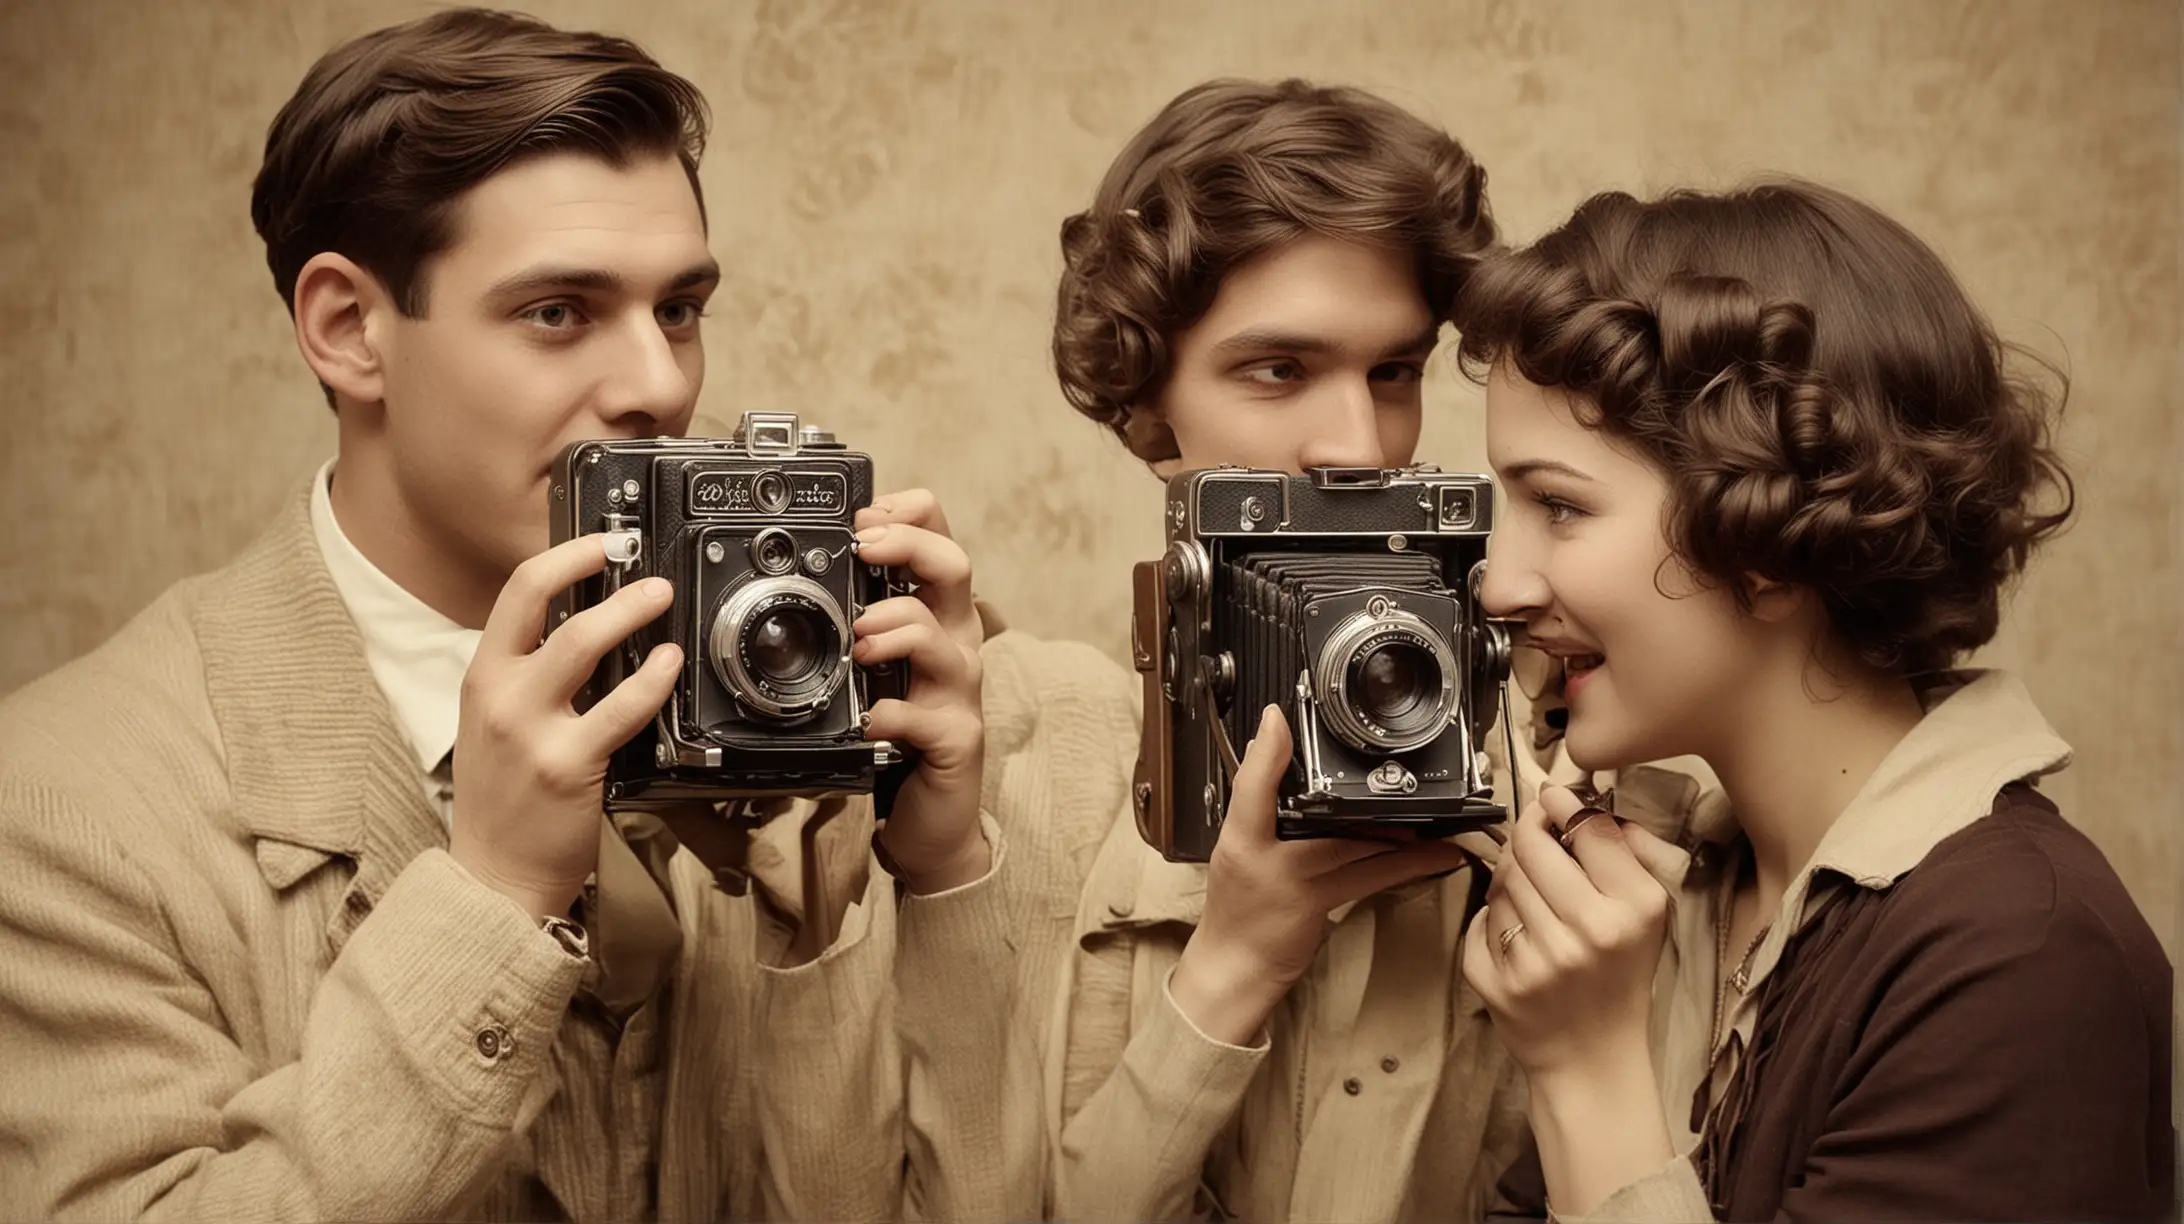 Three Young Adults Capturing Moments with Vintage Camera in 20th Century Setting